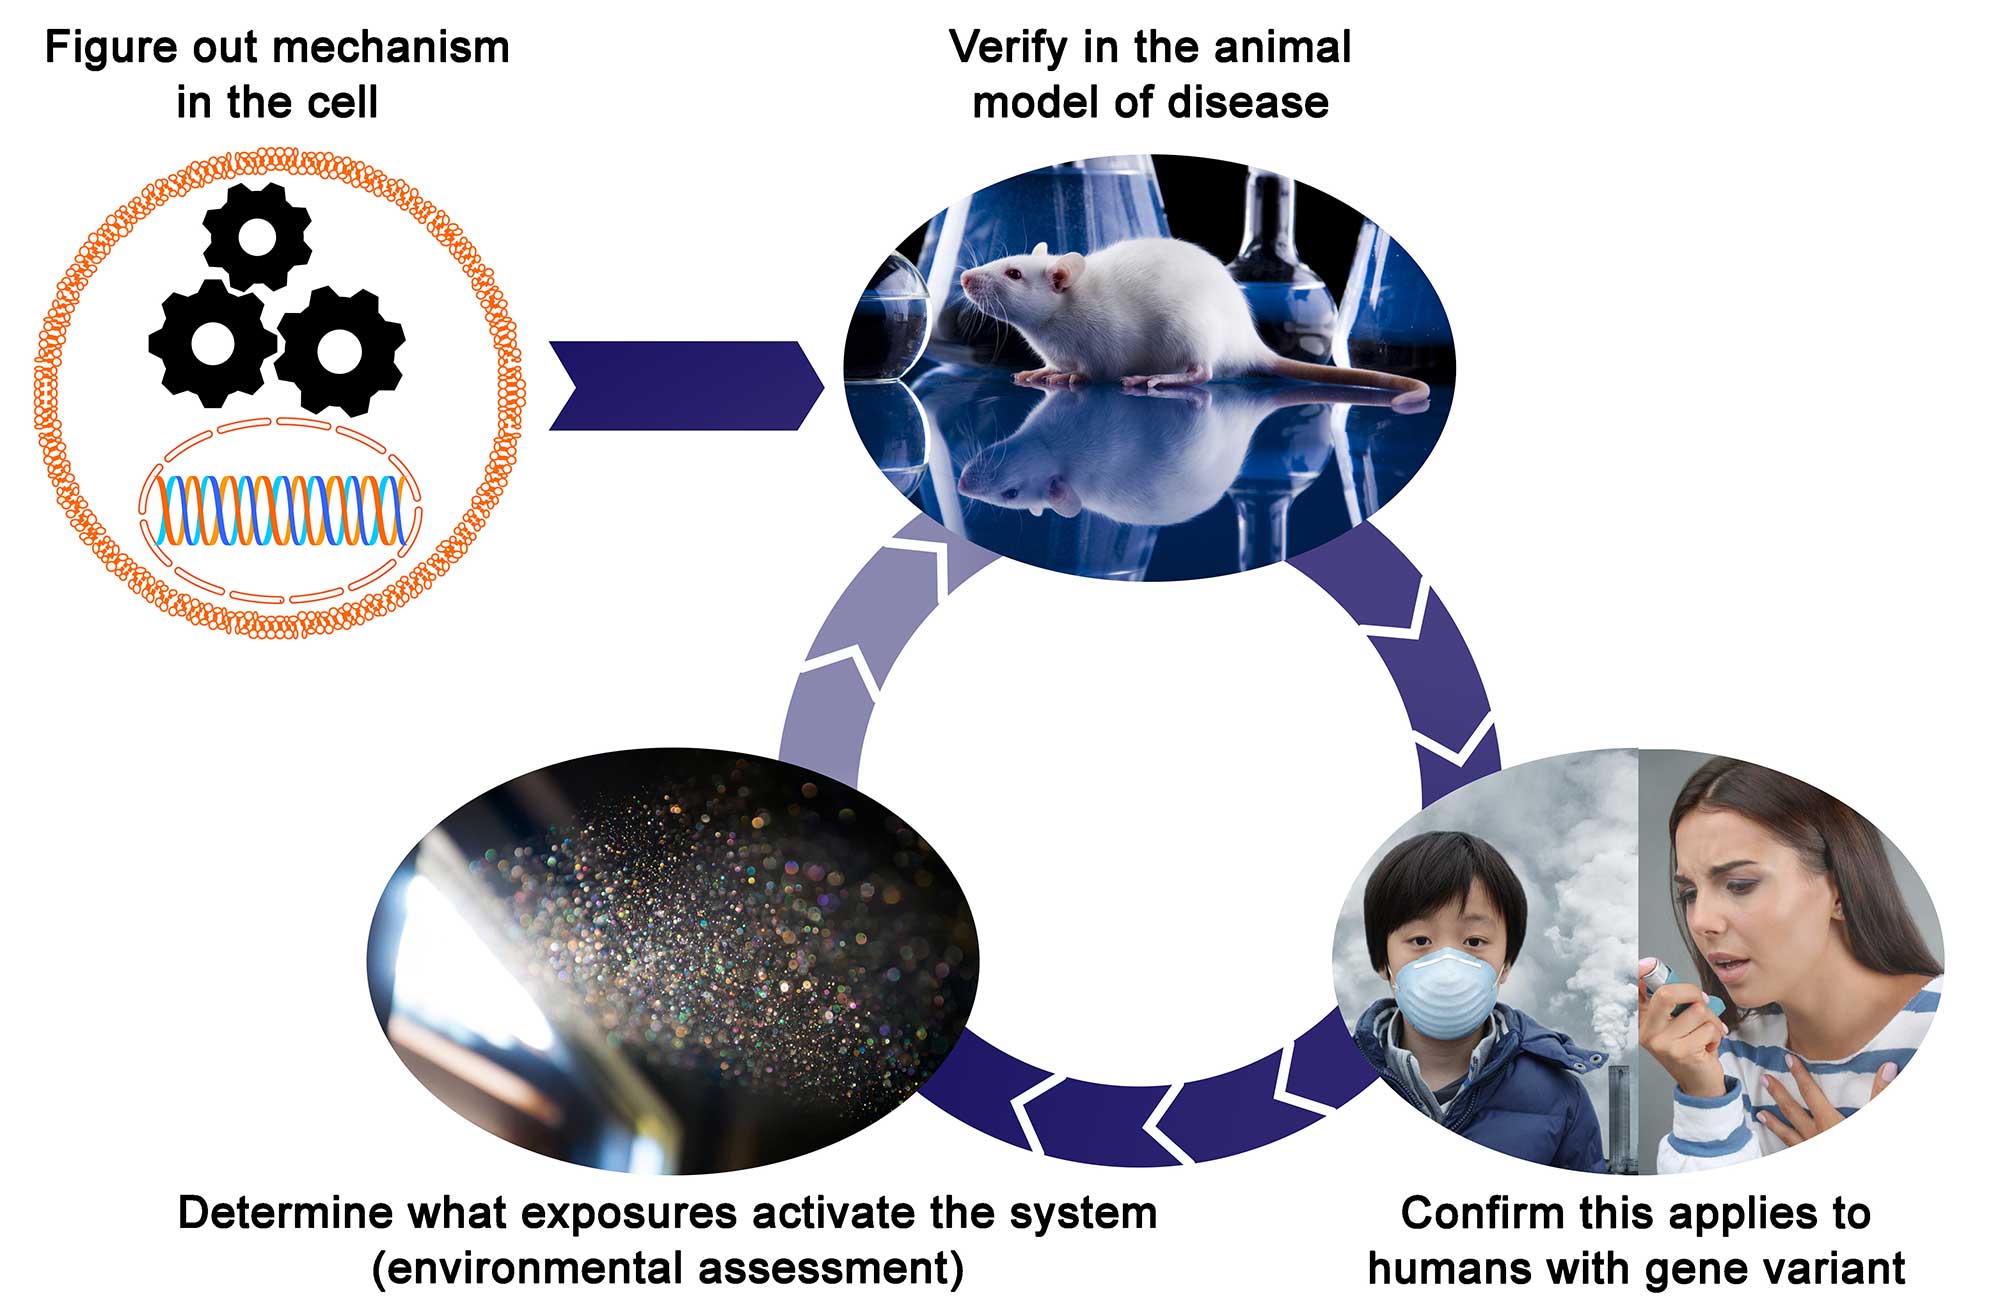 Figure out mechanism in the cell, Verify in the animal model of disease, Determine what exposures activate the system (environmental assessment), Confirm this applies to the humans with gene variant